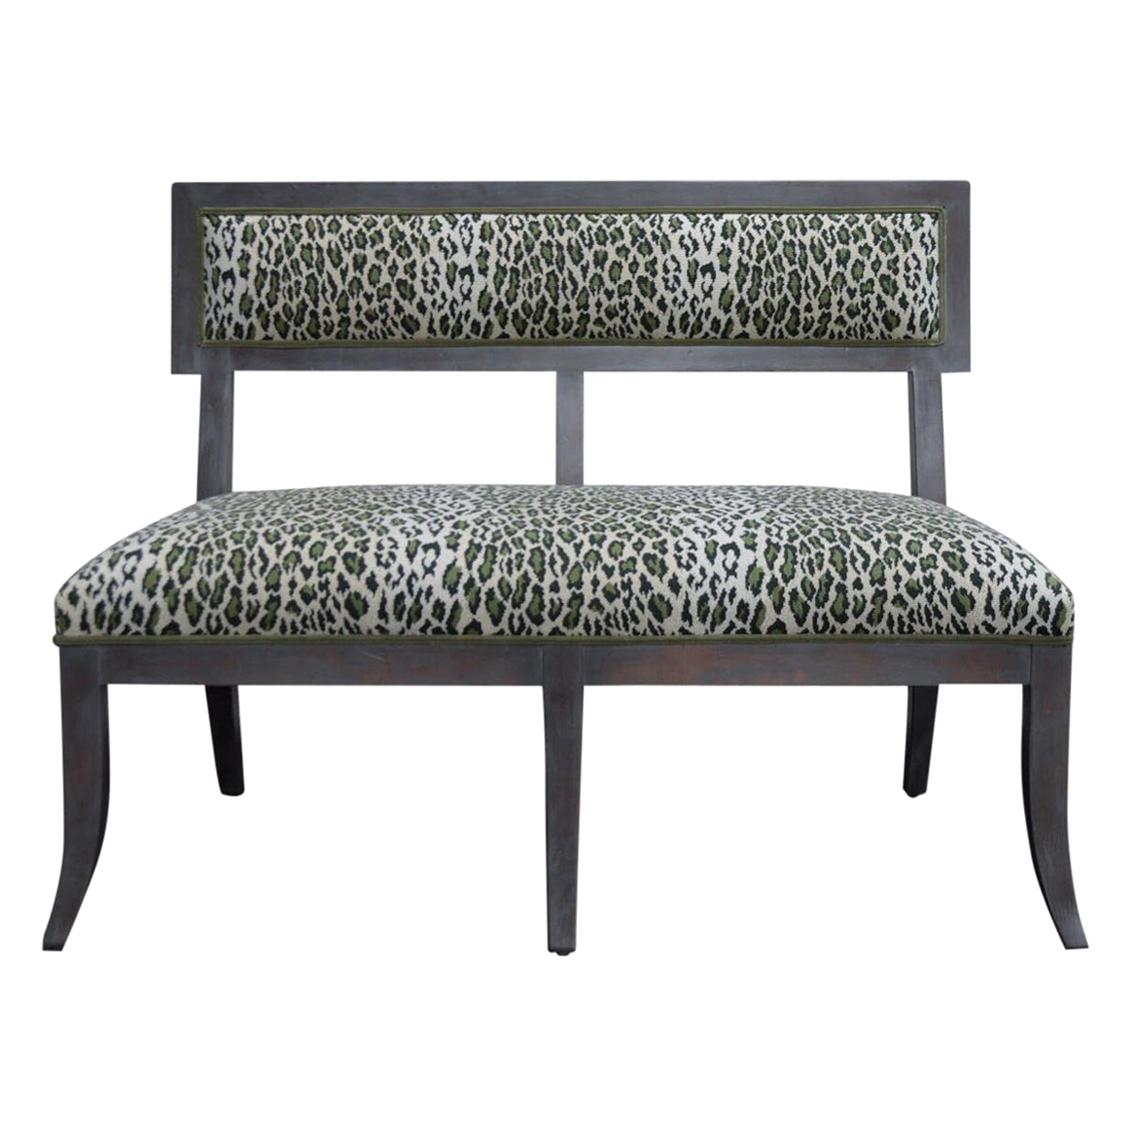 Swedish Gray Dining Banquette in Green Leopard